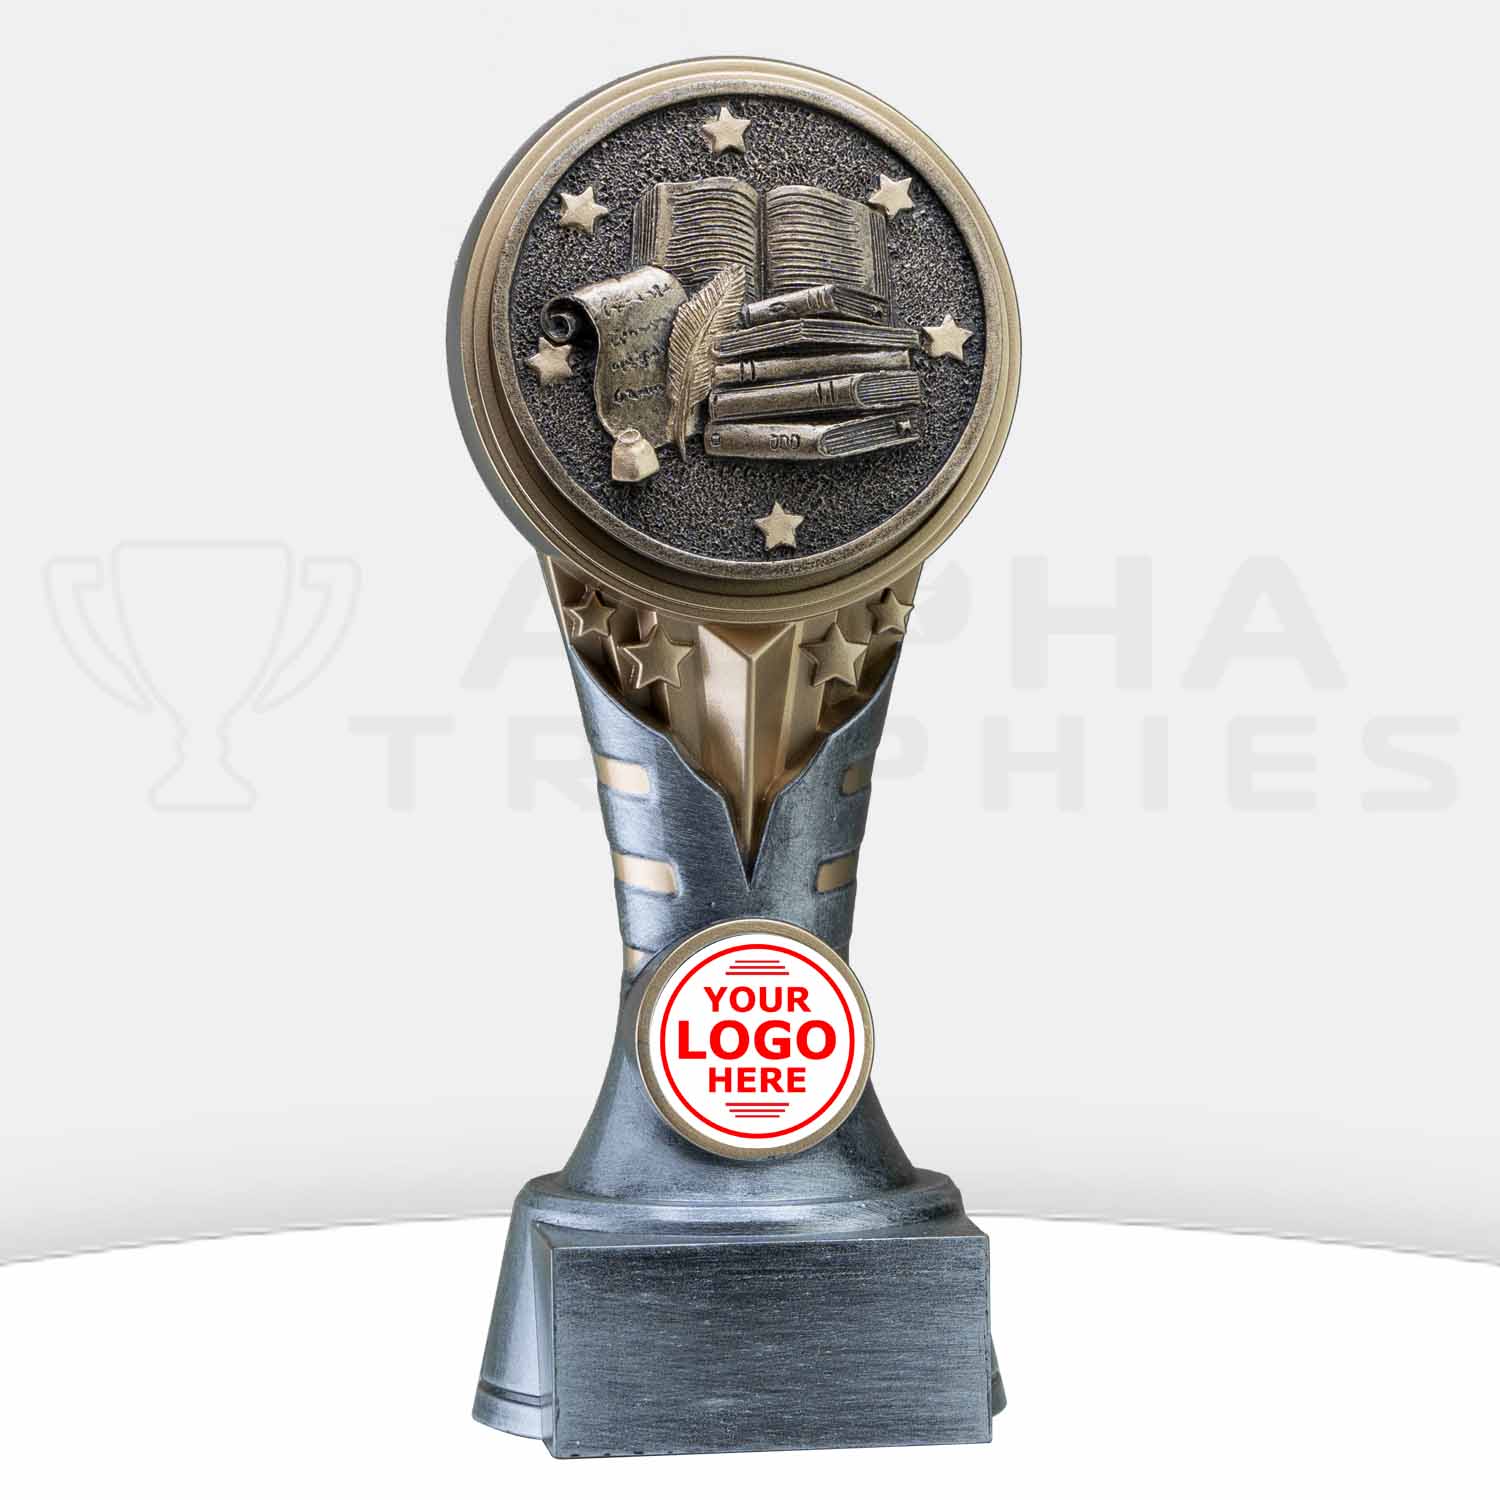 ikon-trophy-english-kn213a-front-with-logo